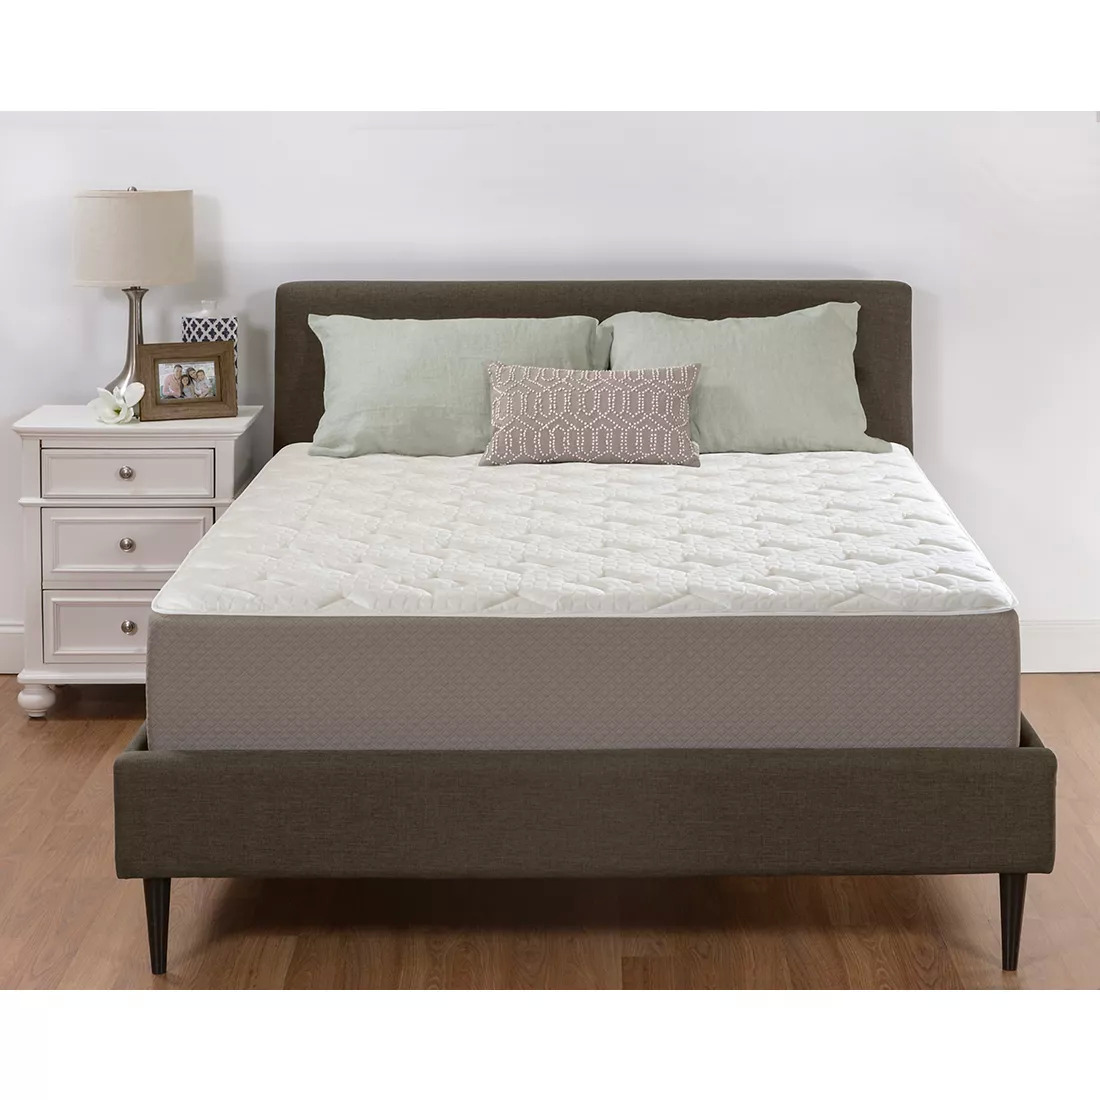 BJ's Wholesale: Up to $500 Off Mattresses + Free Shipping $349.99